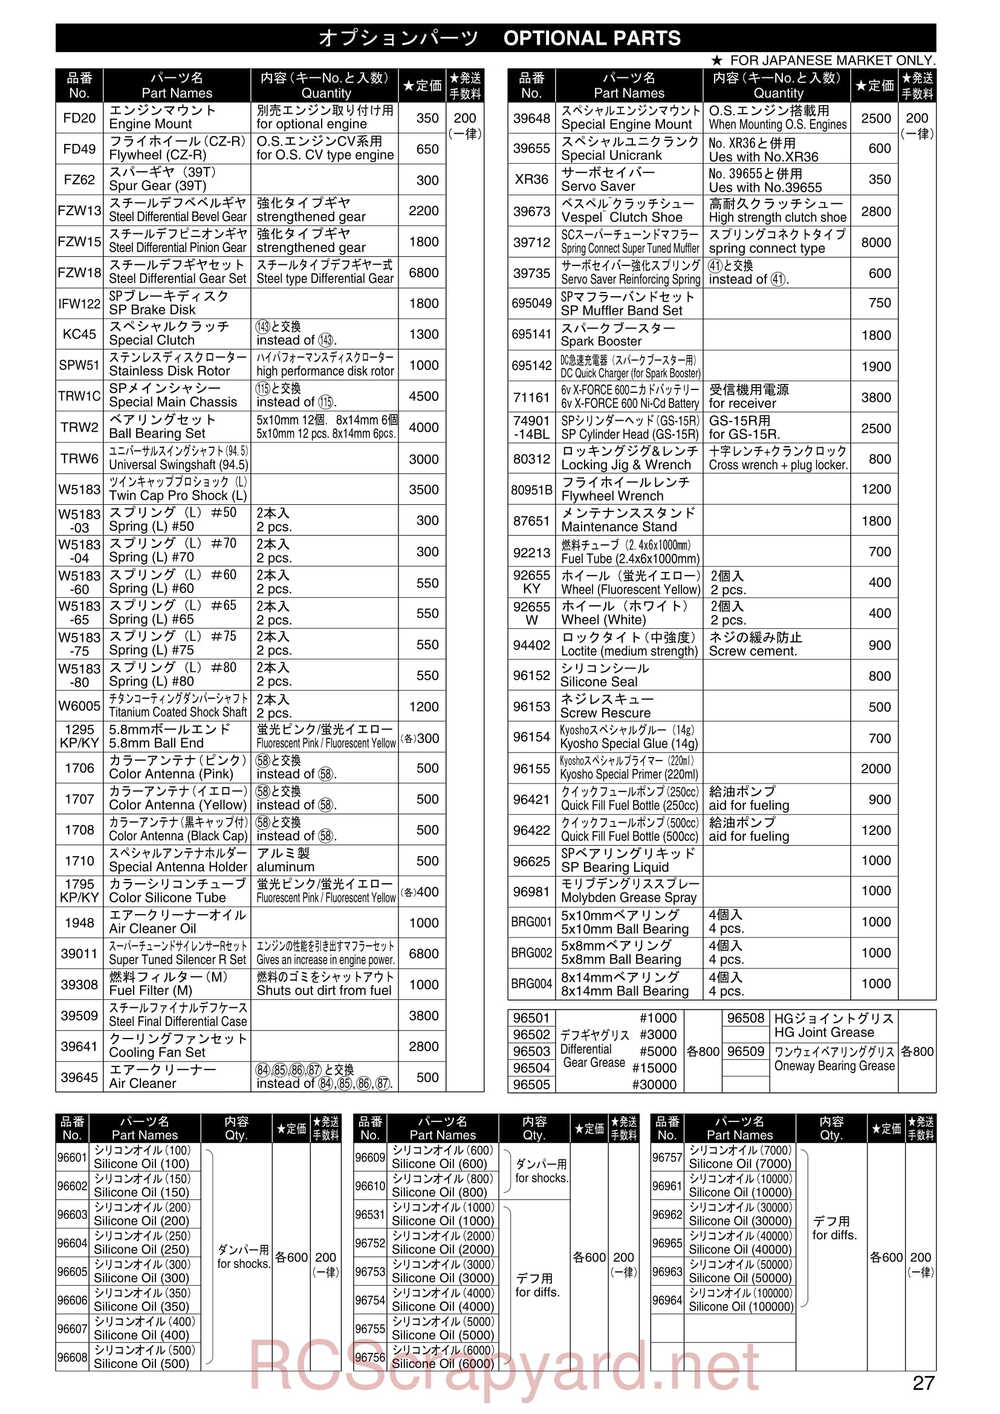 Kyosho - 31213 - TR-15 Monster-Touring - Manual - Page 27